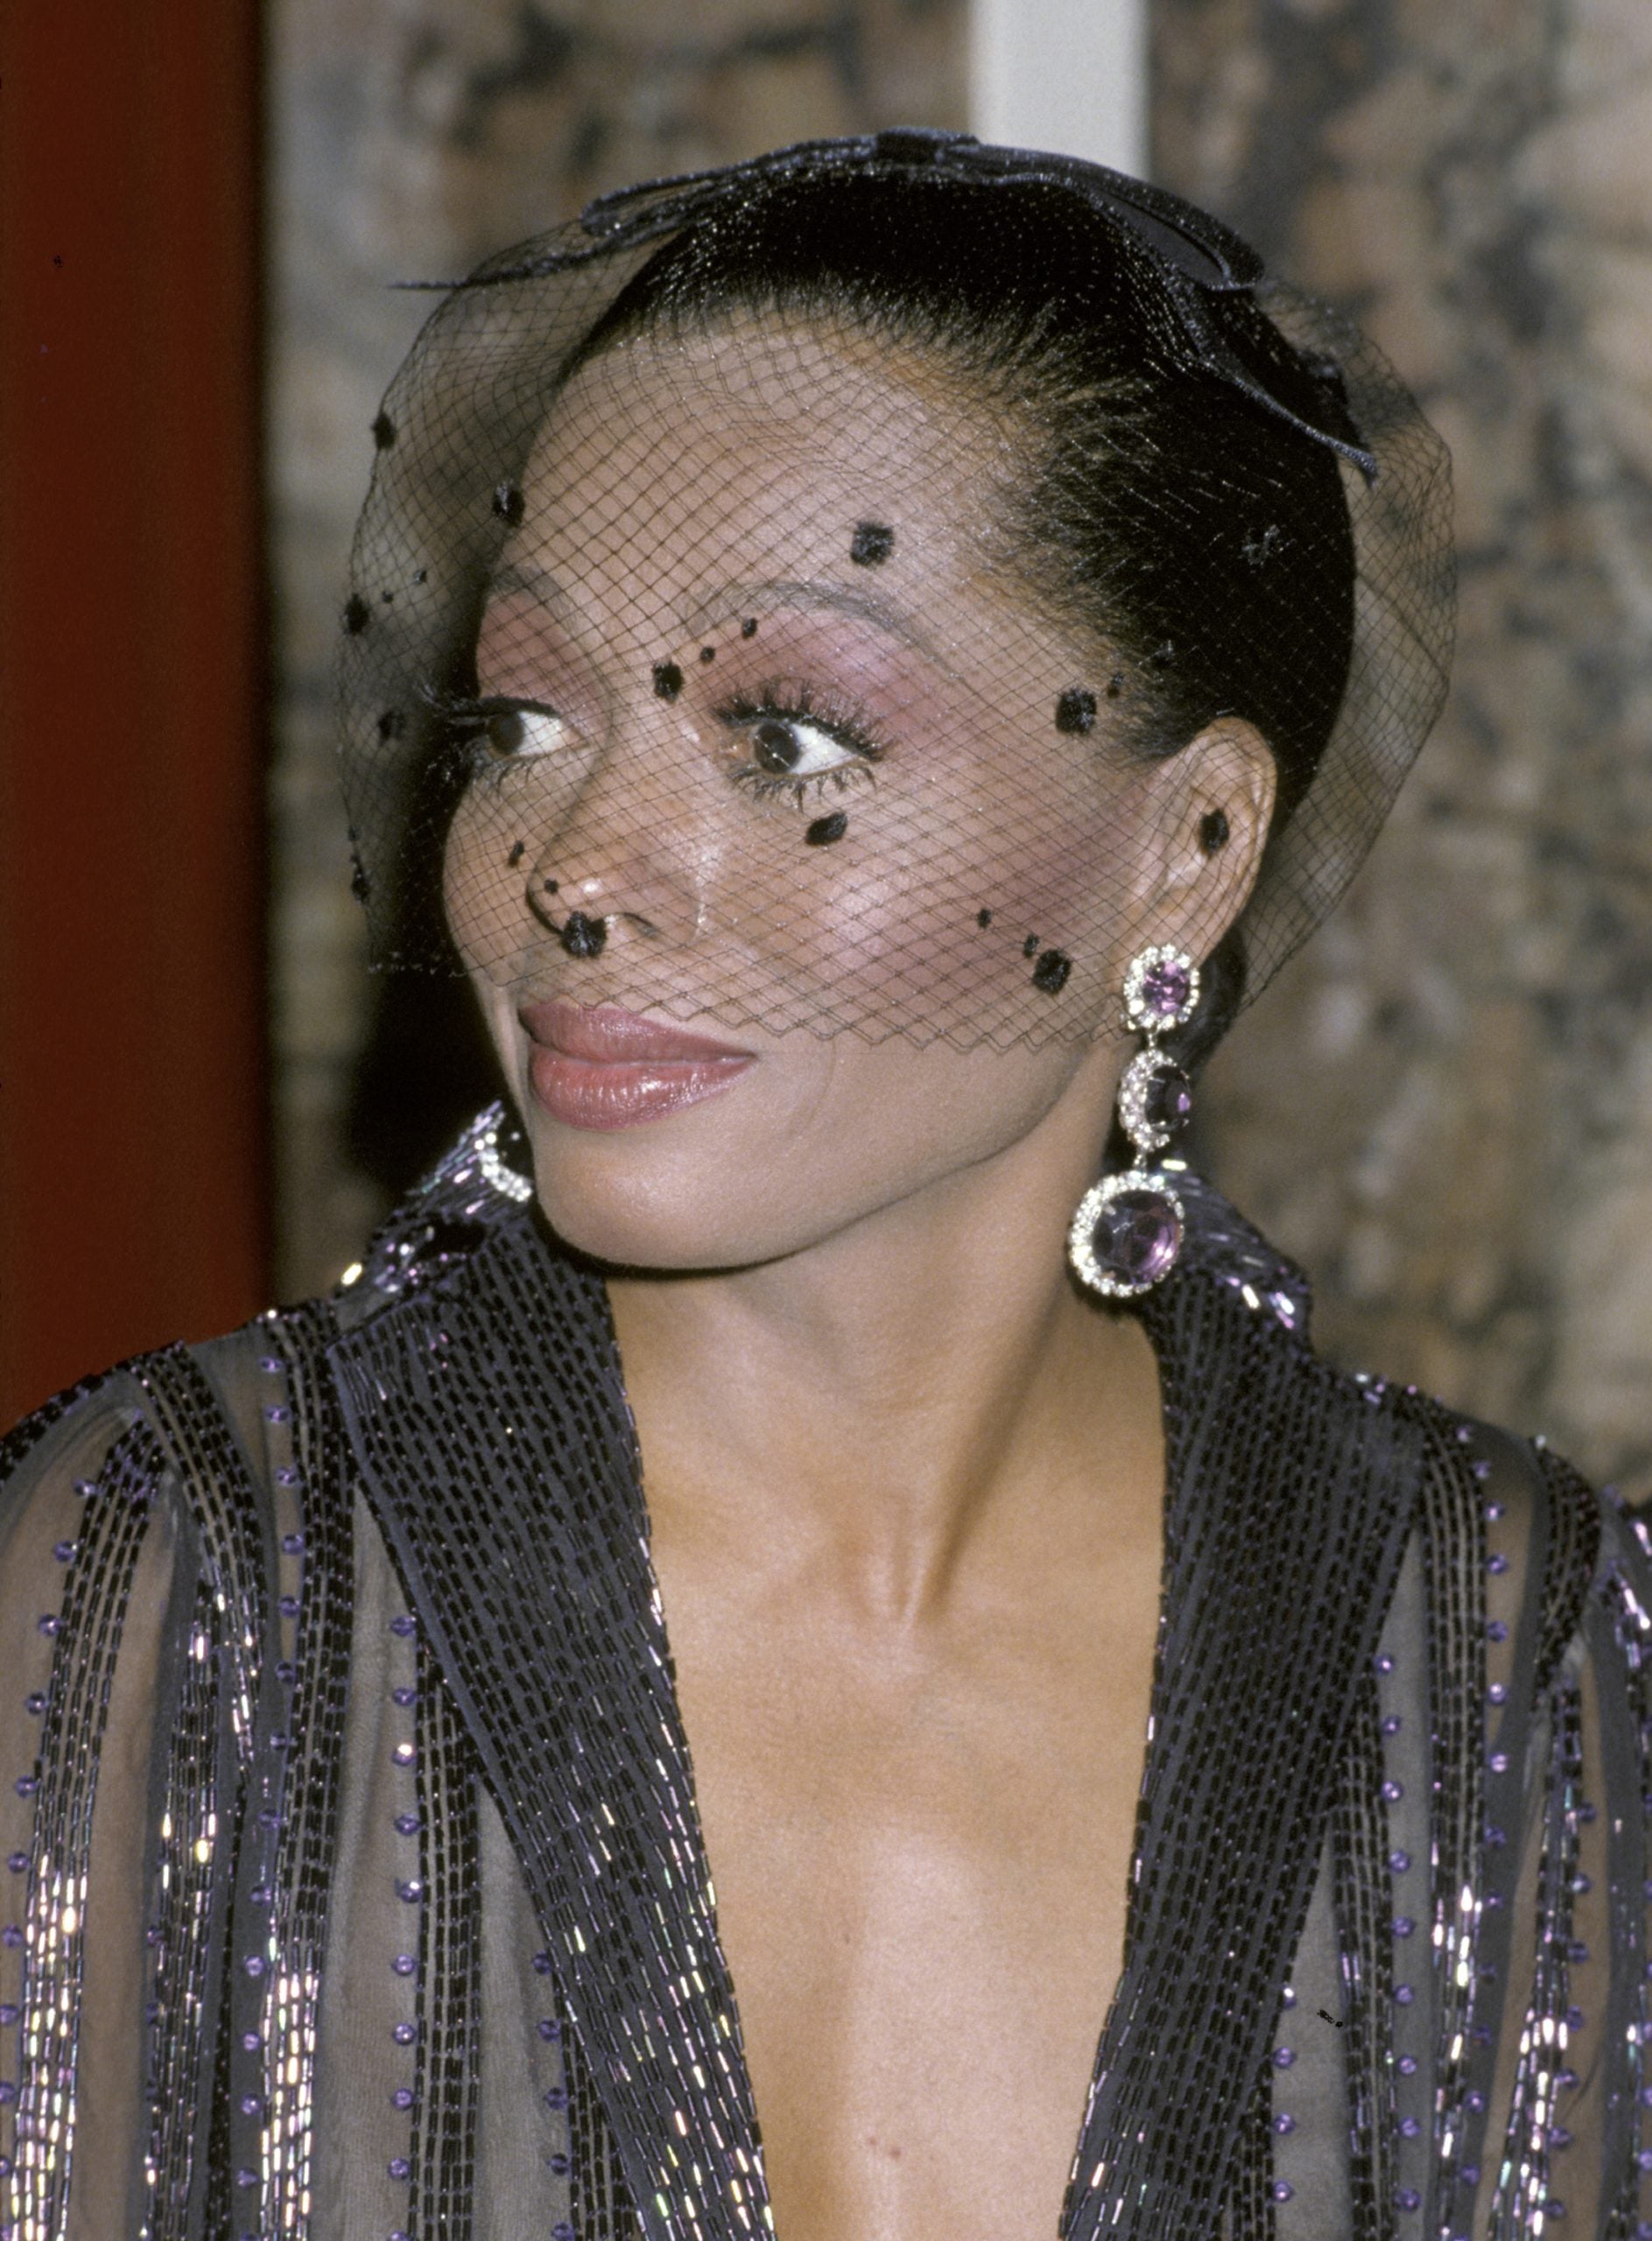 81 Of Diana Ross' Most Iconic Beauty Moments